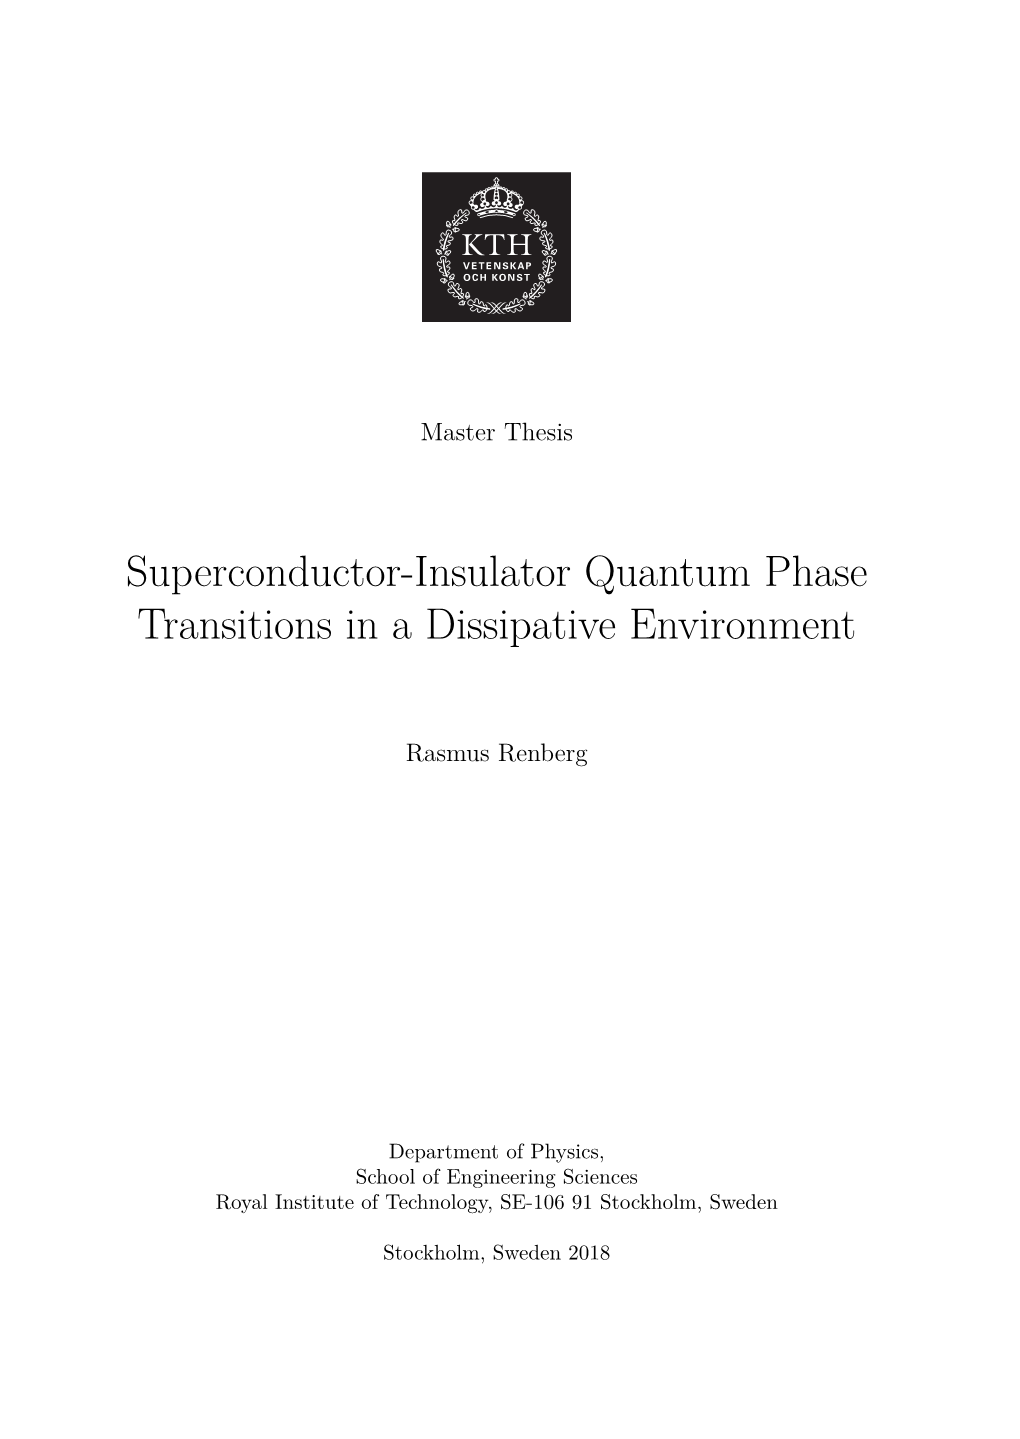 Superconductor-Insulator Quantum Phase Transitions in a Dissipative Environment